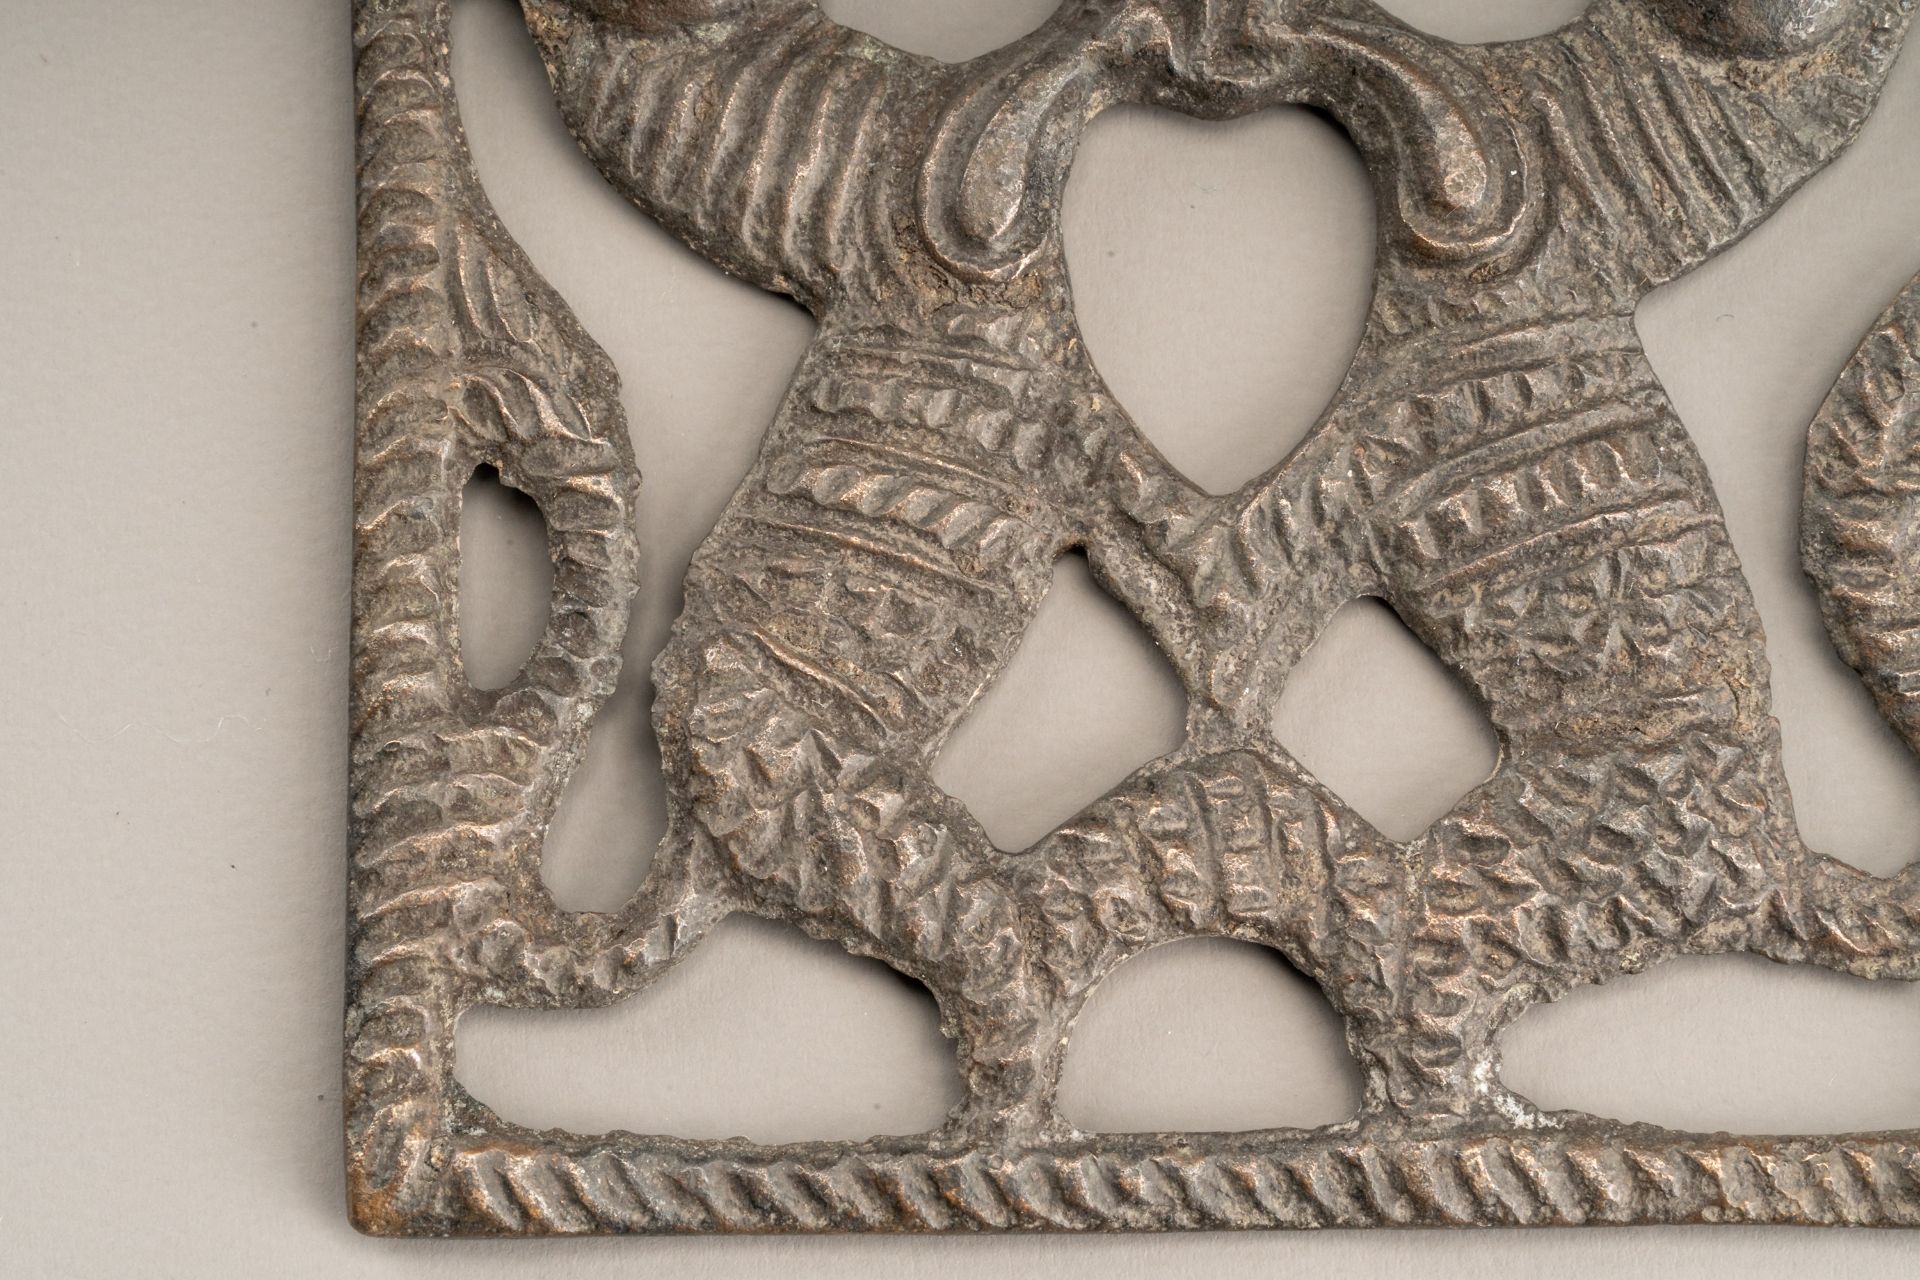 A WESTERN ASIATIC STYLE OPENWORK BRONZE PLAQUE WITH TIGERS - Image 3 of 6